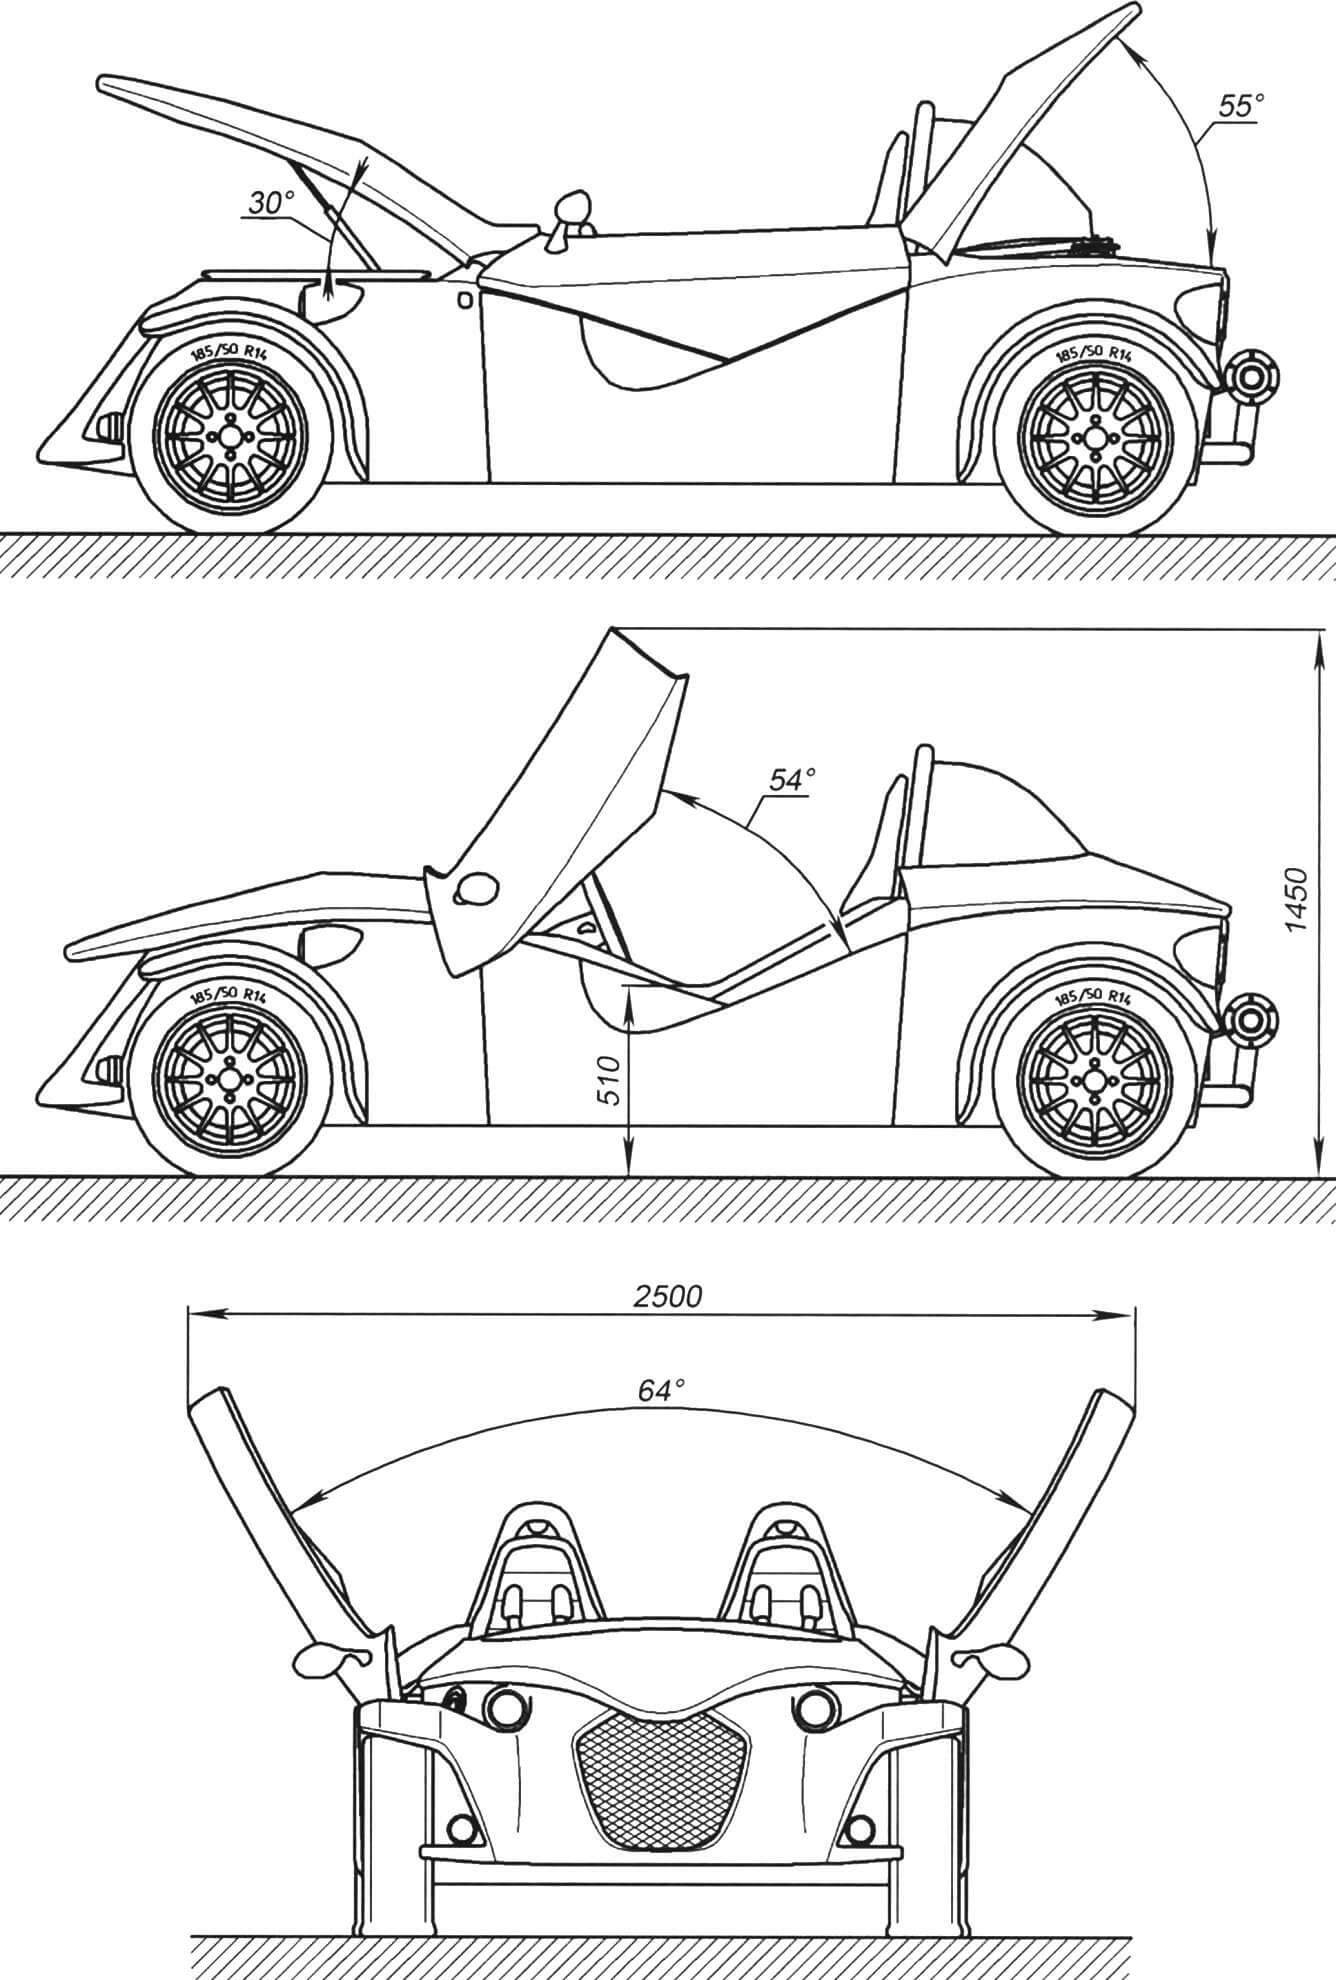 Diagram of opening the trunk lid (front), engine compartment hood (rear) and doors (sides)